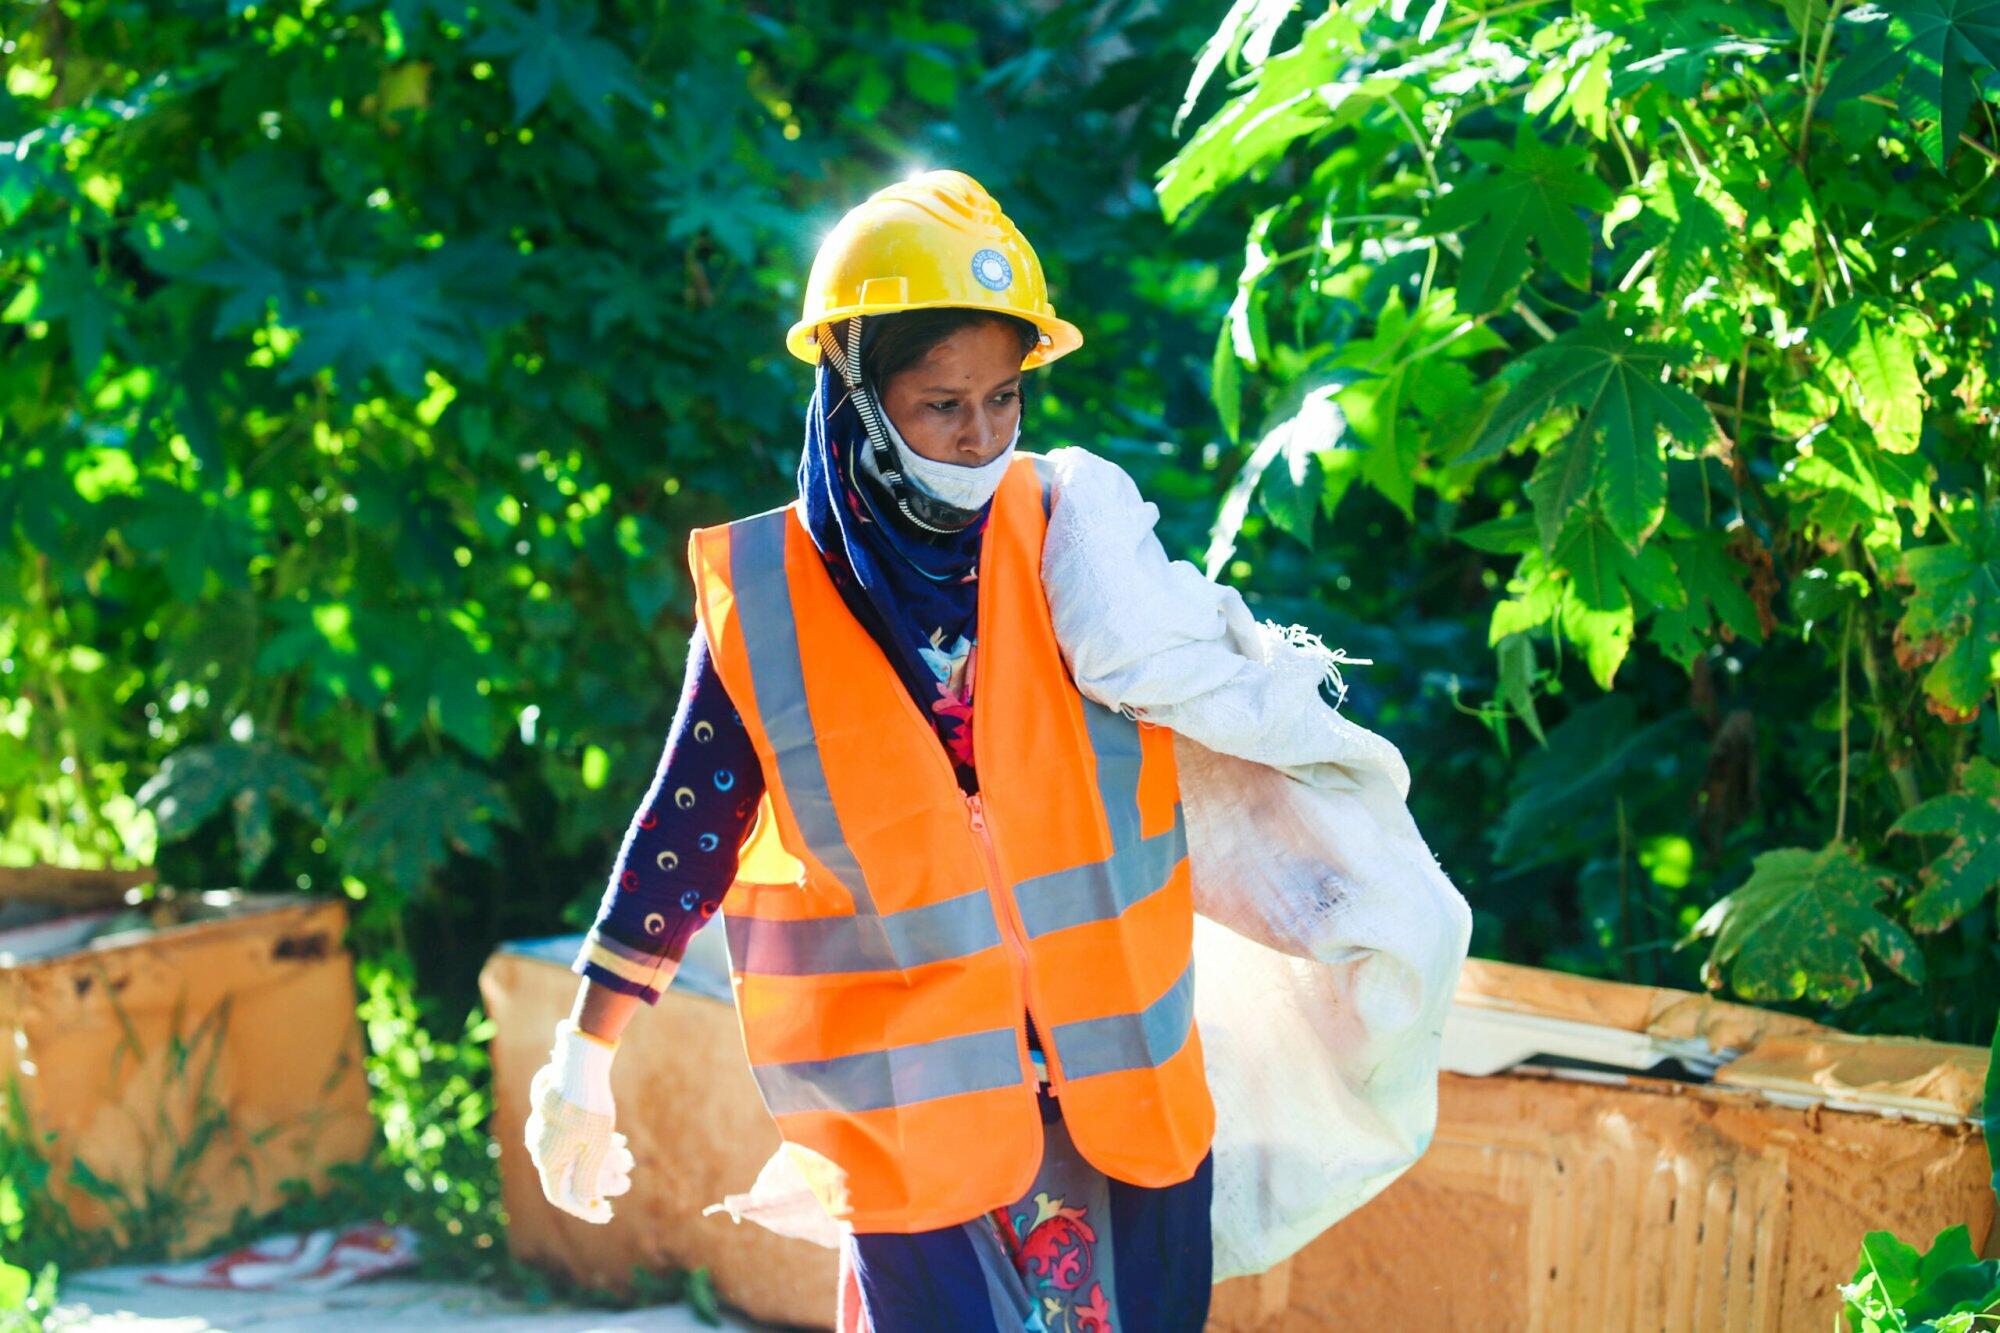 A woman in practical action wearing a safety vest and carrying a bag in Sudan.